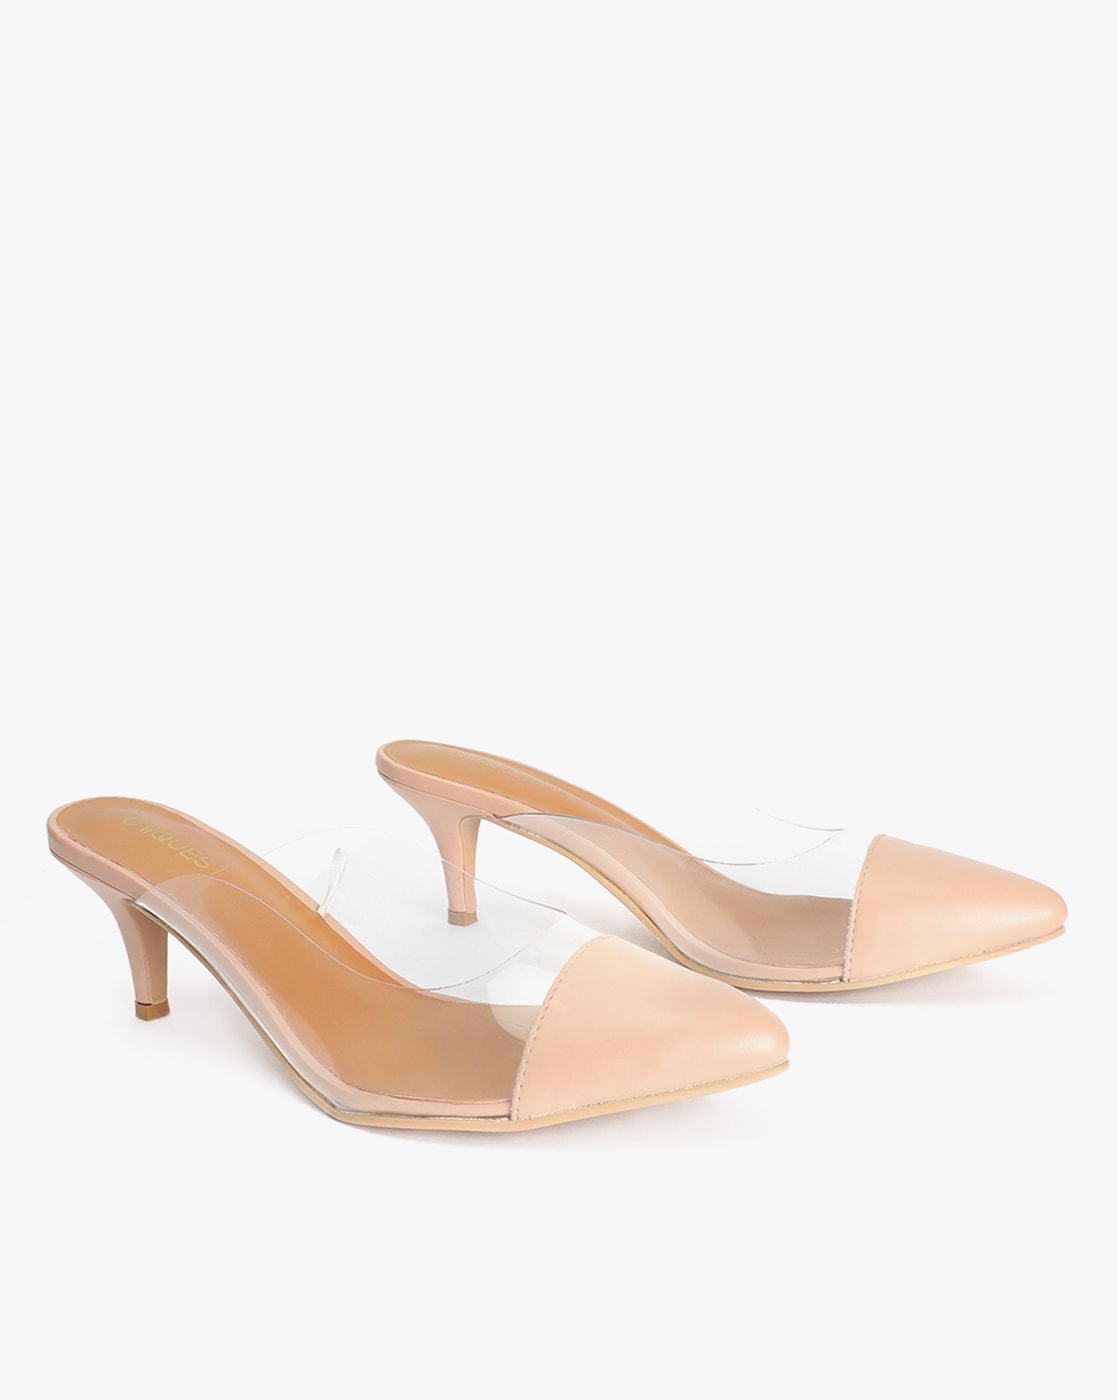 clear nude pumps